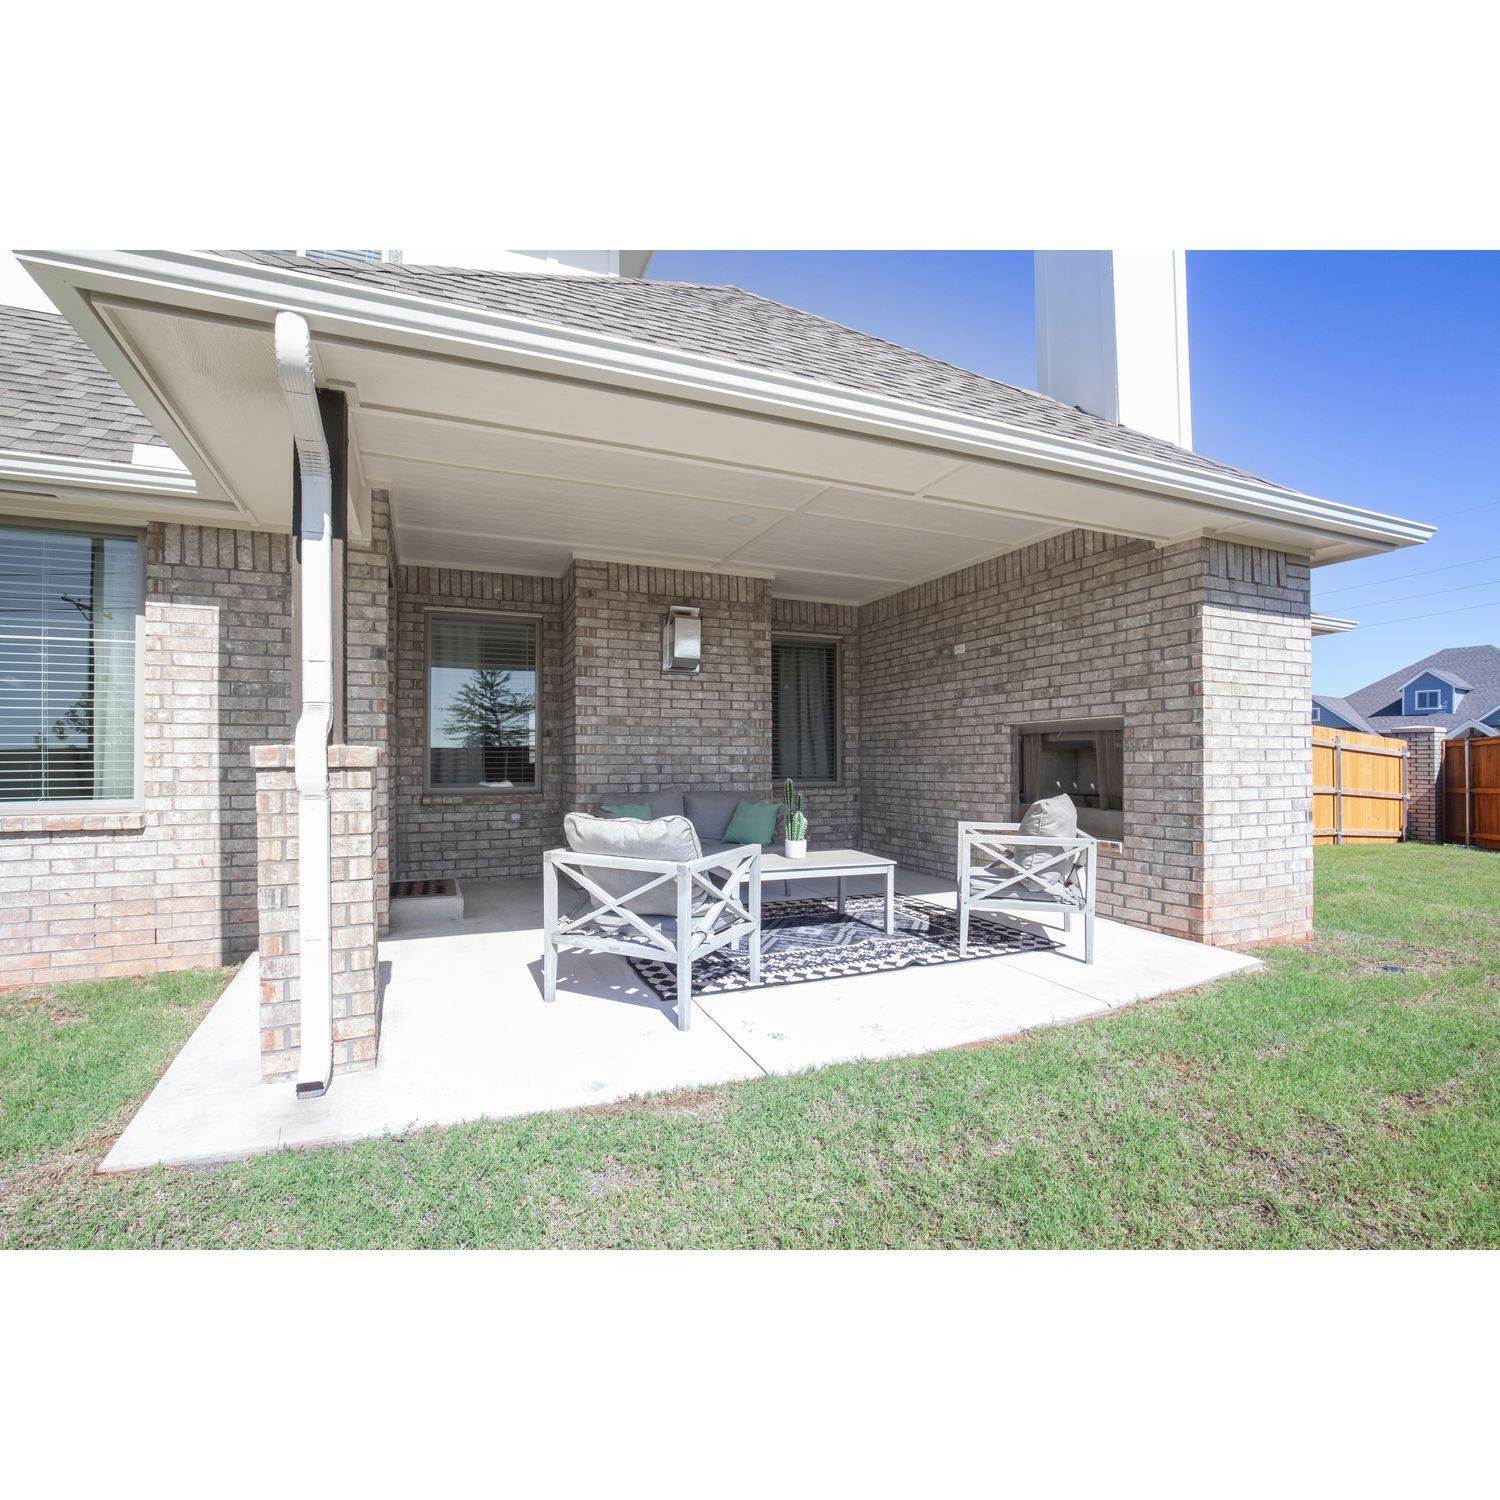 37. Broadmoore Heights building at 2800 Heather Haven, Moore, OK 73160